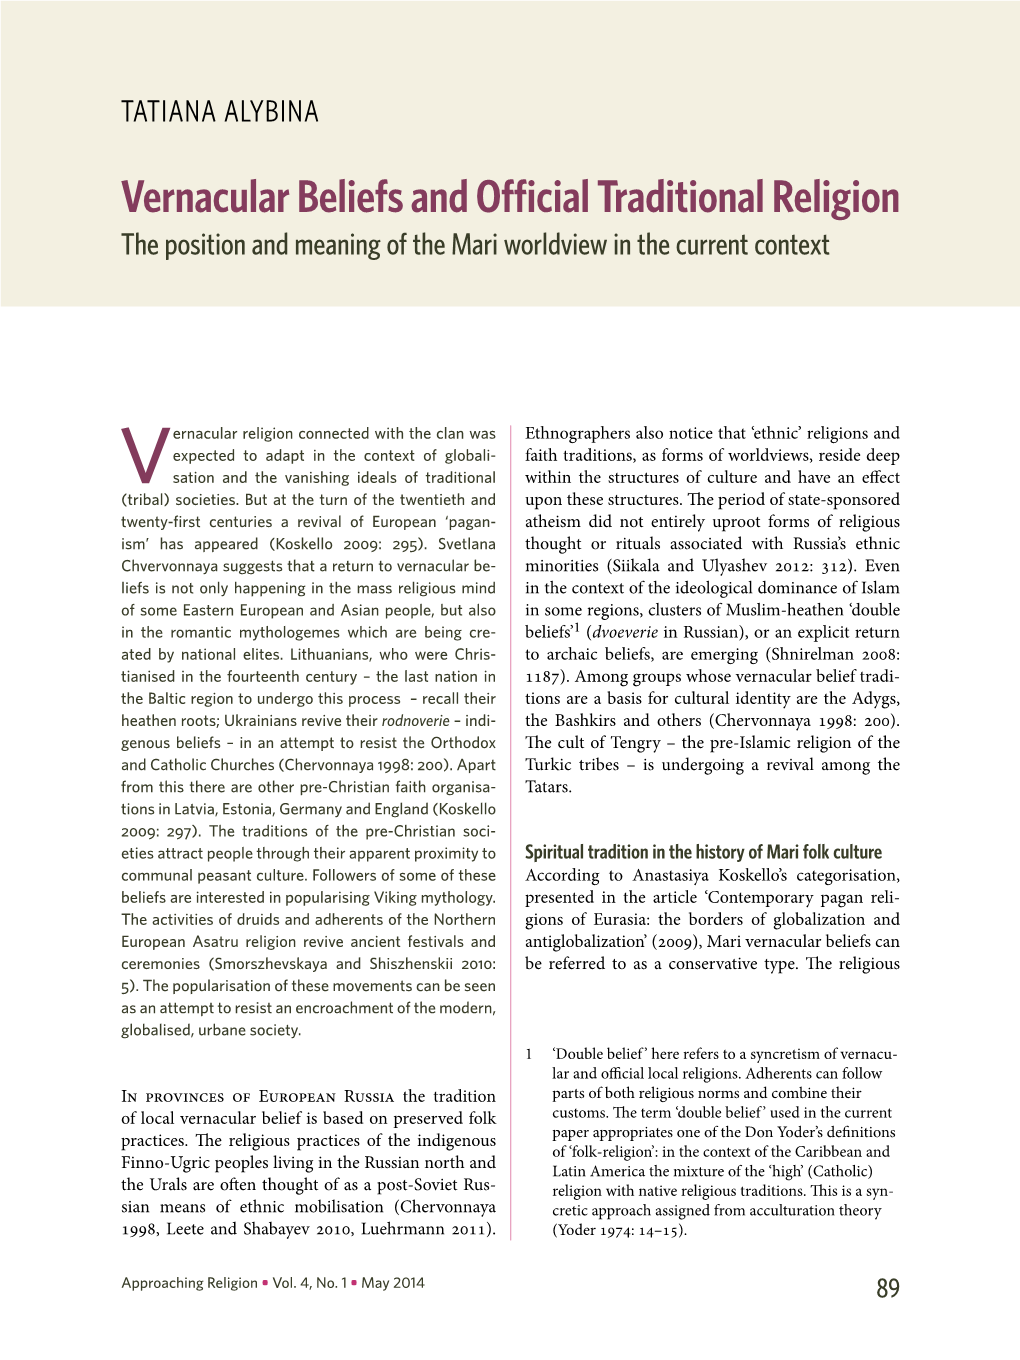 Vernacular Beliefs and Official Traditional Religion the Position and Meaning of the Mari Worldview in the Current Context